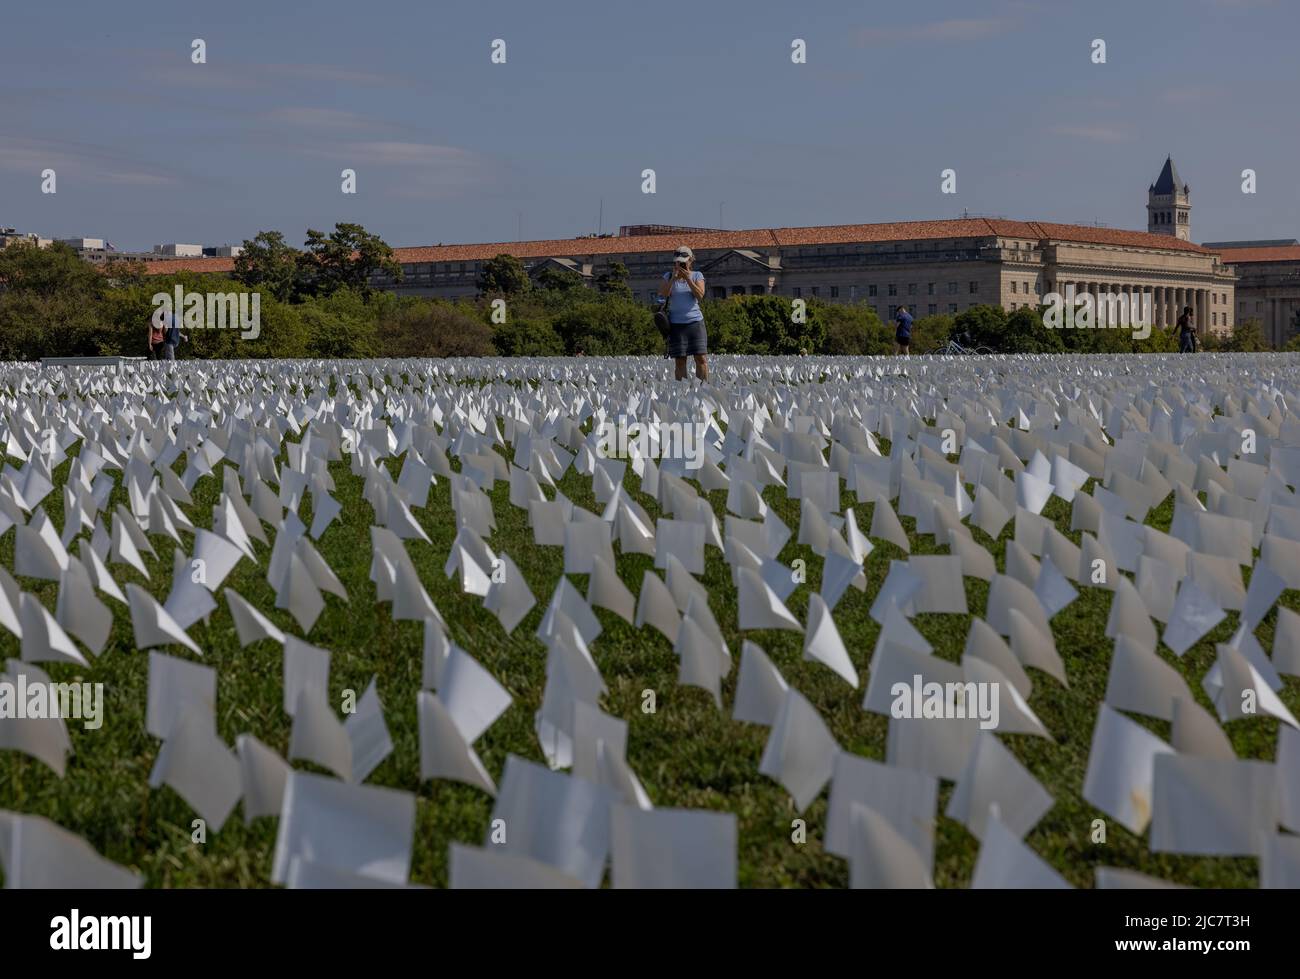 WASHINGTON, D.C. – September 19, 2021: People visit “In America: Remember”, an installation by Suzanne Brennan Firstenberg honoring Covid-19 victims. Stock Photo